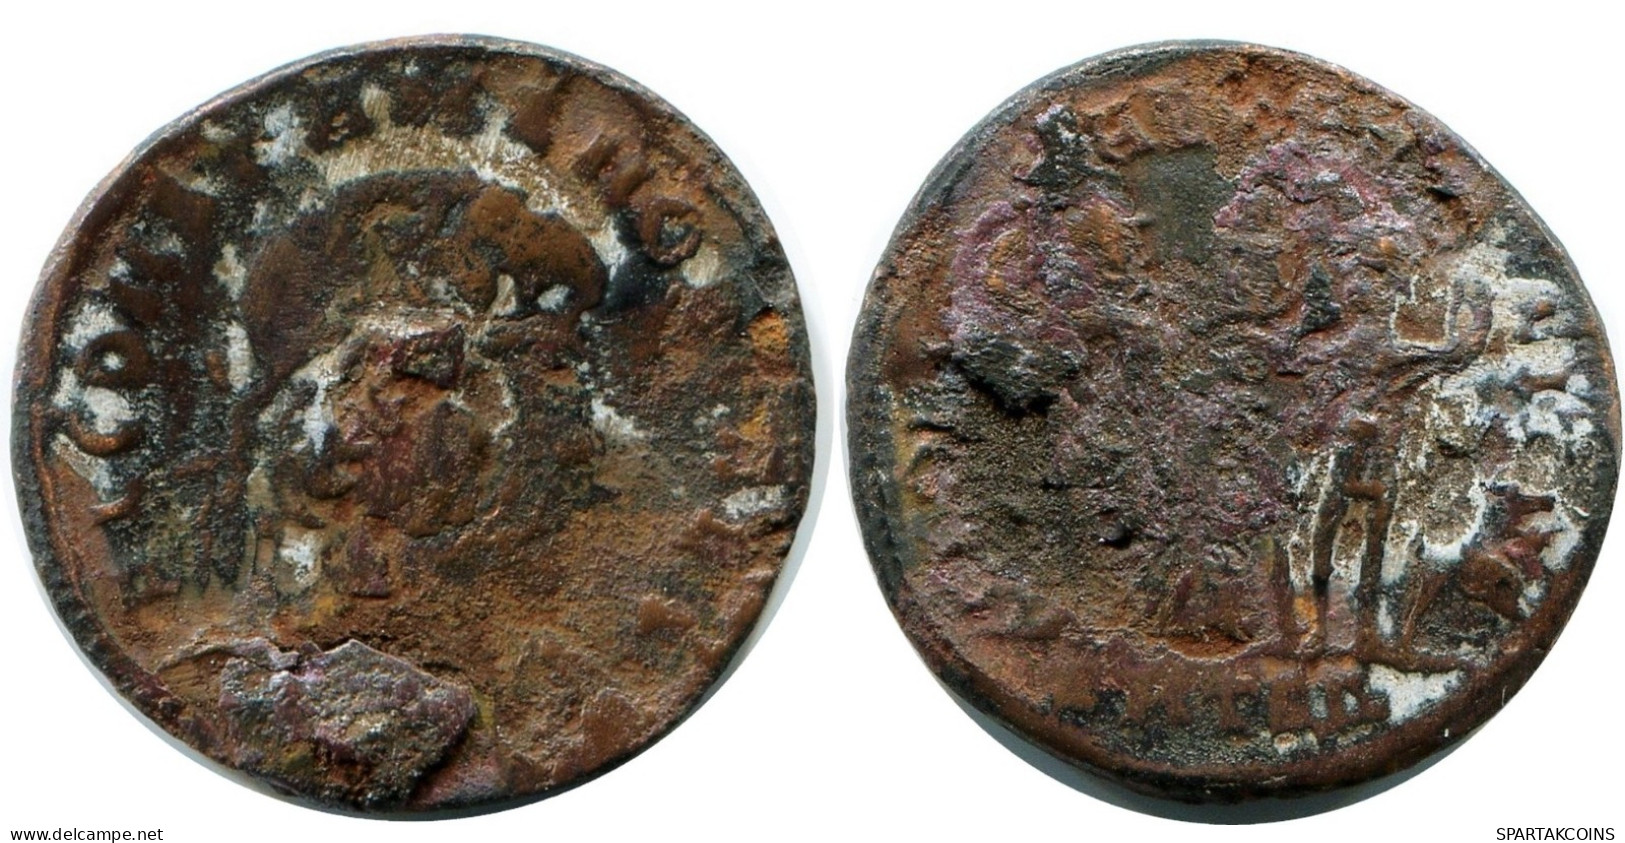 CONSTANS MINTED IN THESSALONICA FROM THE ROYAL ONTARIO MUSEUM #ANC11901.14.D.A - L'Empire Chrétien (307 à 363)